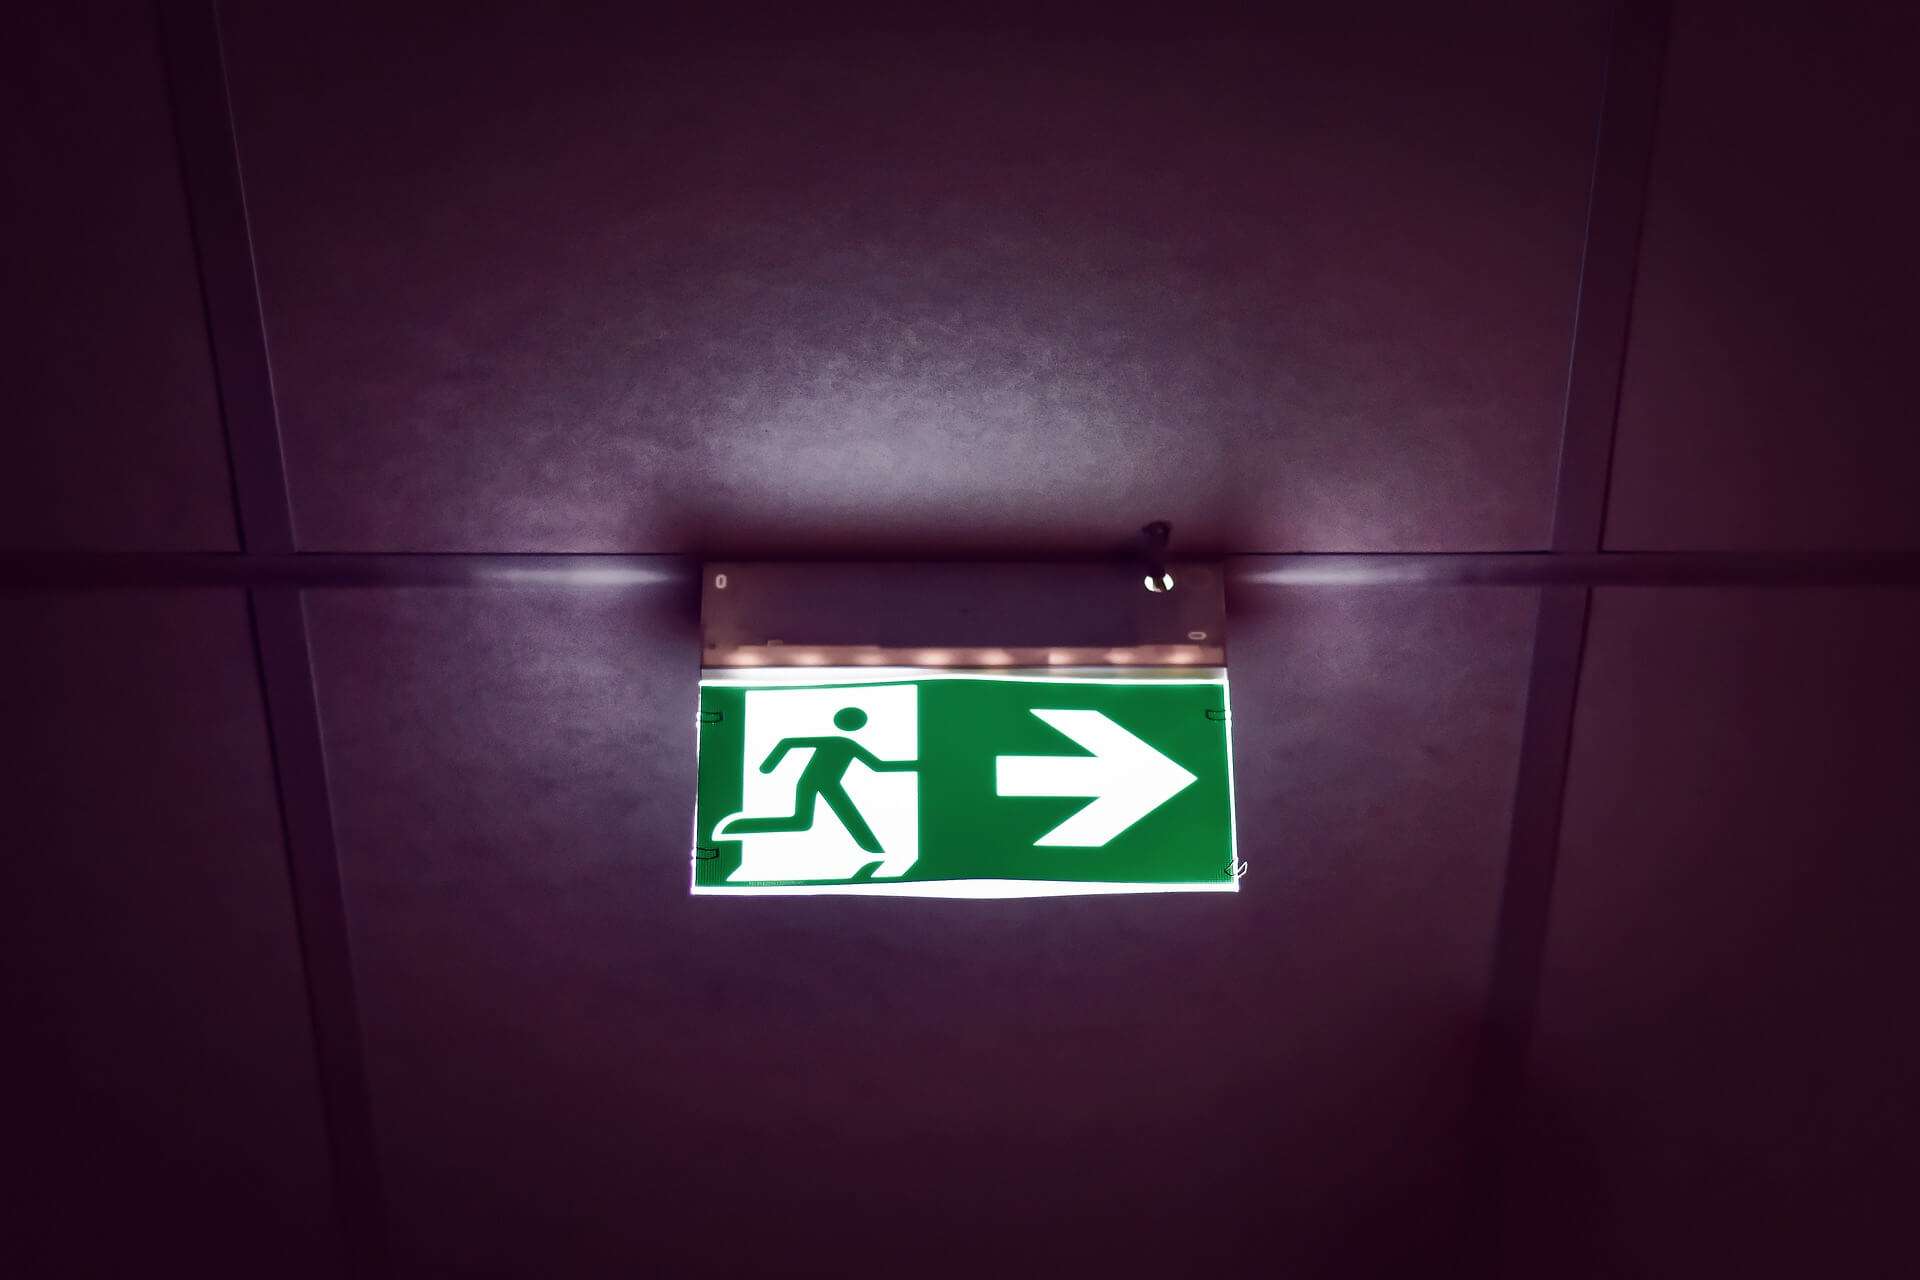 Emergency response exit sign